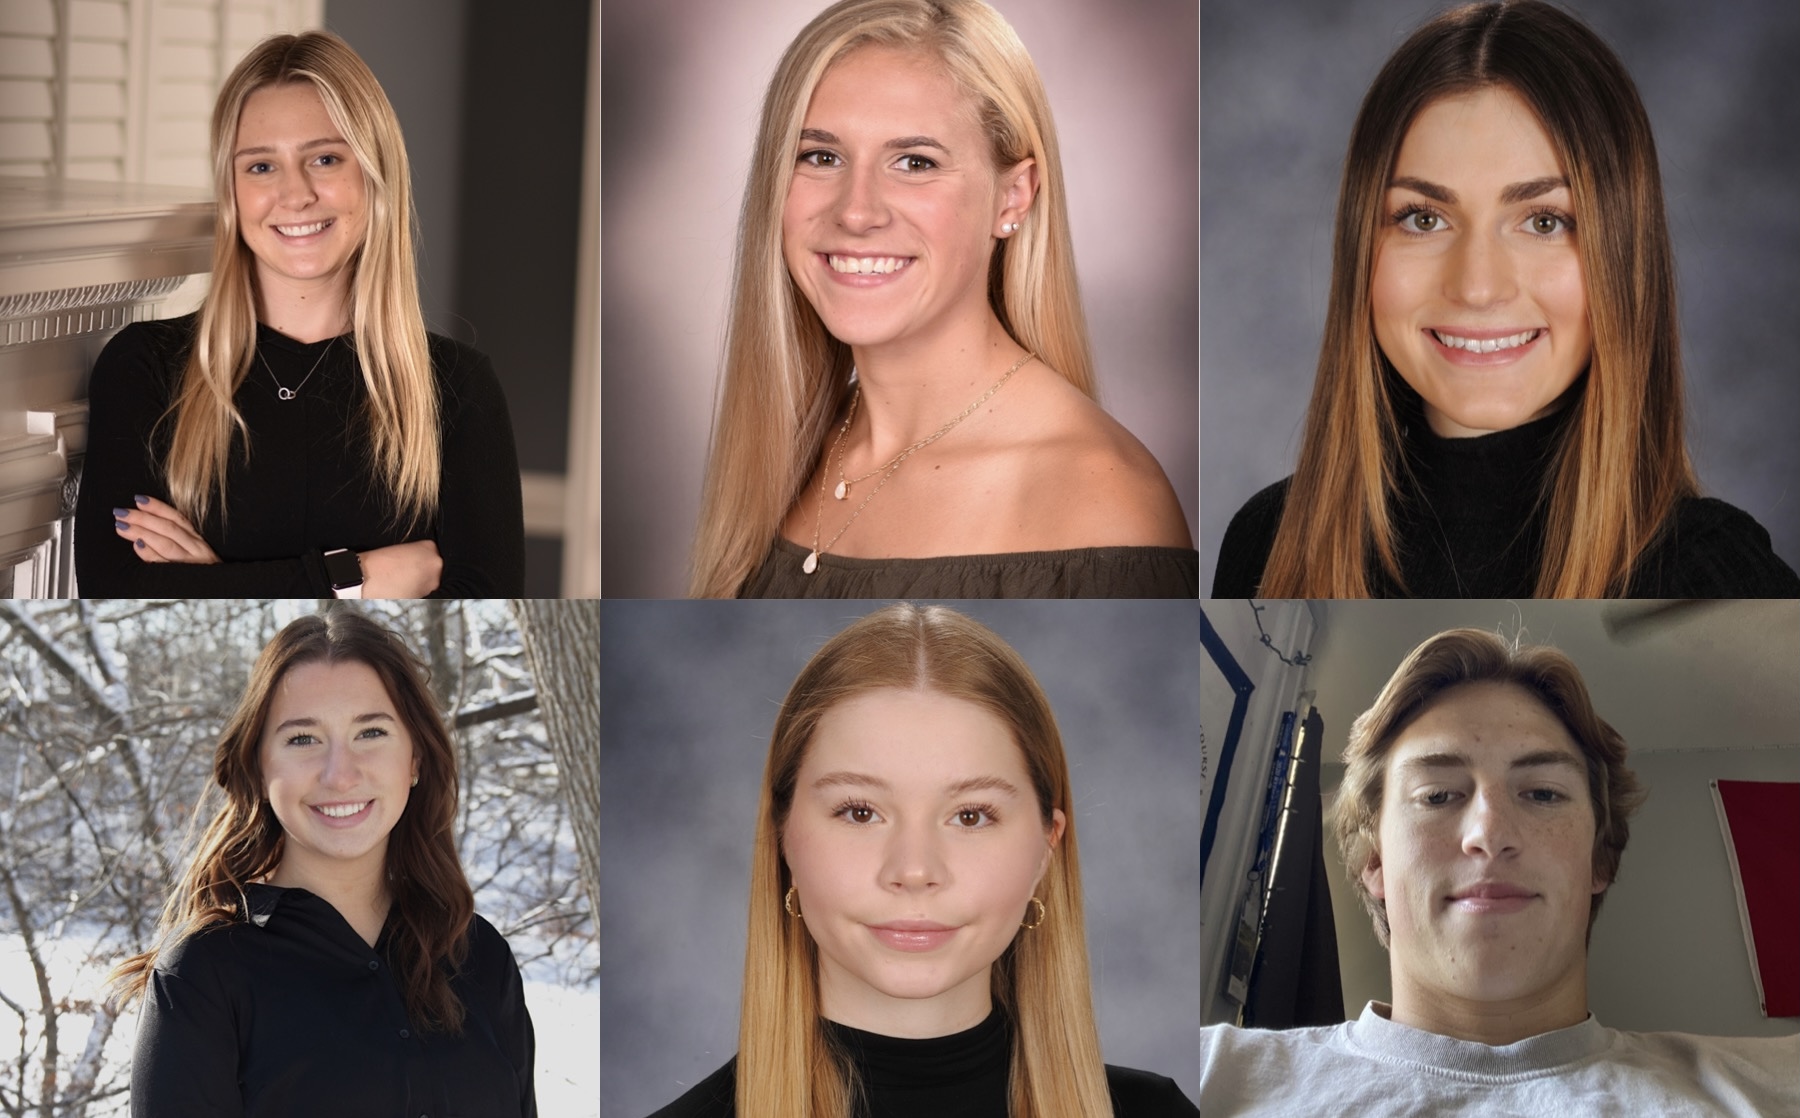 Top Row (Left to Right): Rachel Krueger, Victoria Heiligenthal, Tatum Rubald. Bottom Row (Left to Right): Lily Gallagher, Addison Dupies, Benjamin Smith